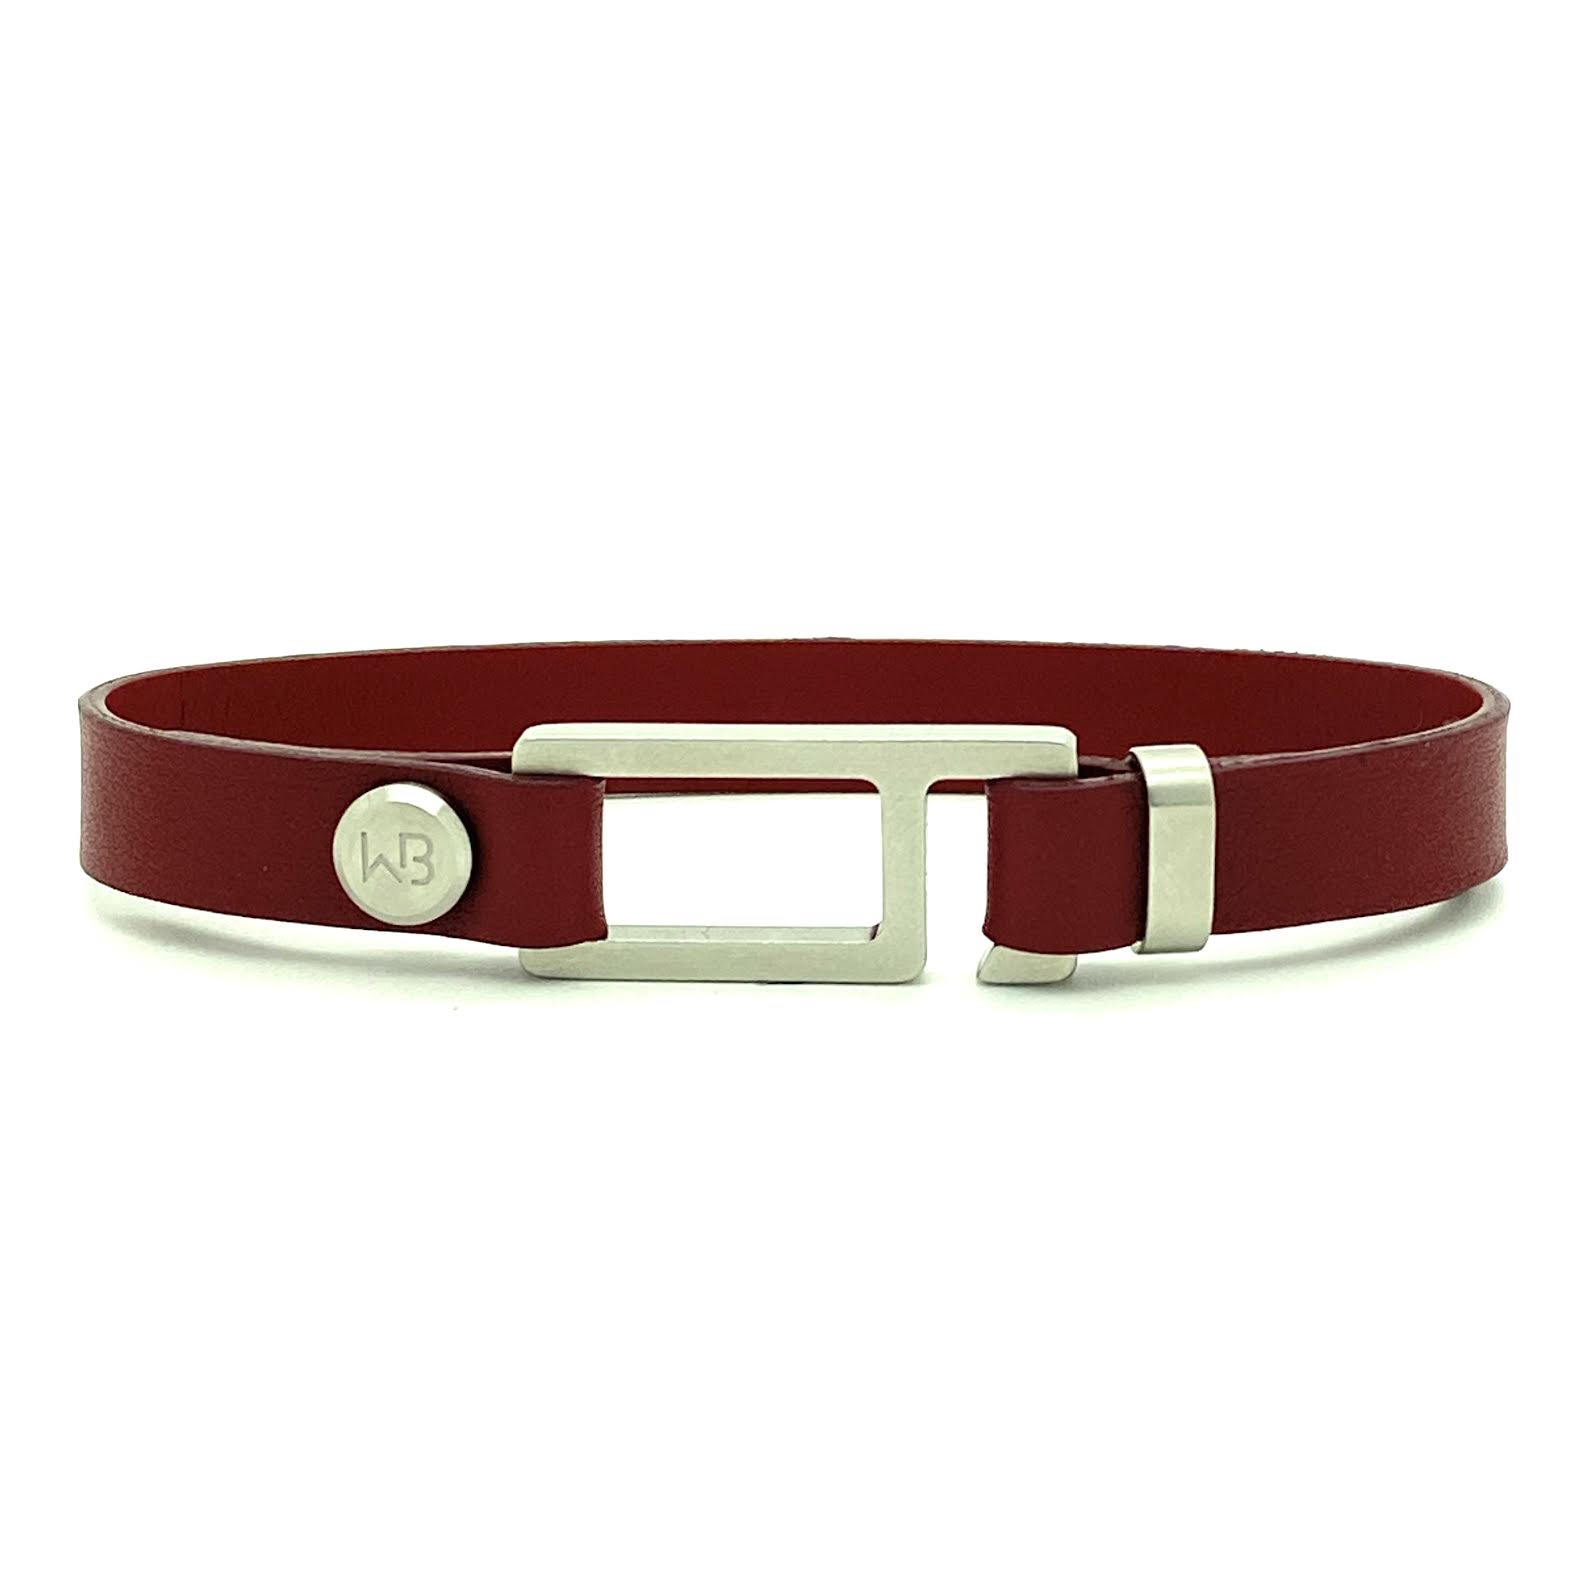 Our striking red wine Italian leather bracelet is paired perfectly with our artisan designed, lightly brushed hardware. Your hardware choices include Rose Gold, Yellow Gold, Stainless Steel or Black Ceramic. This adjustable size bracelet is a distinctive piece worn alone or with a WristBend stacking bracelet. Made by WristBend